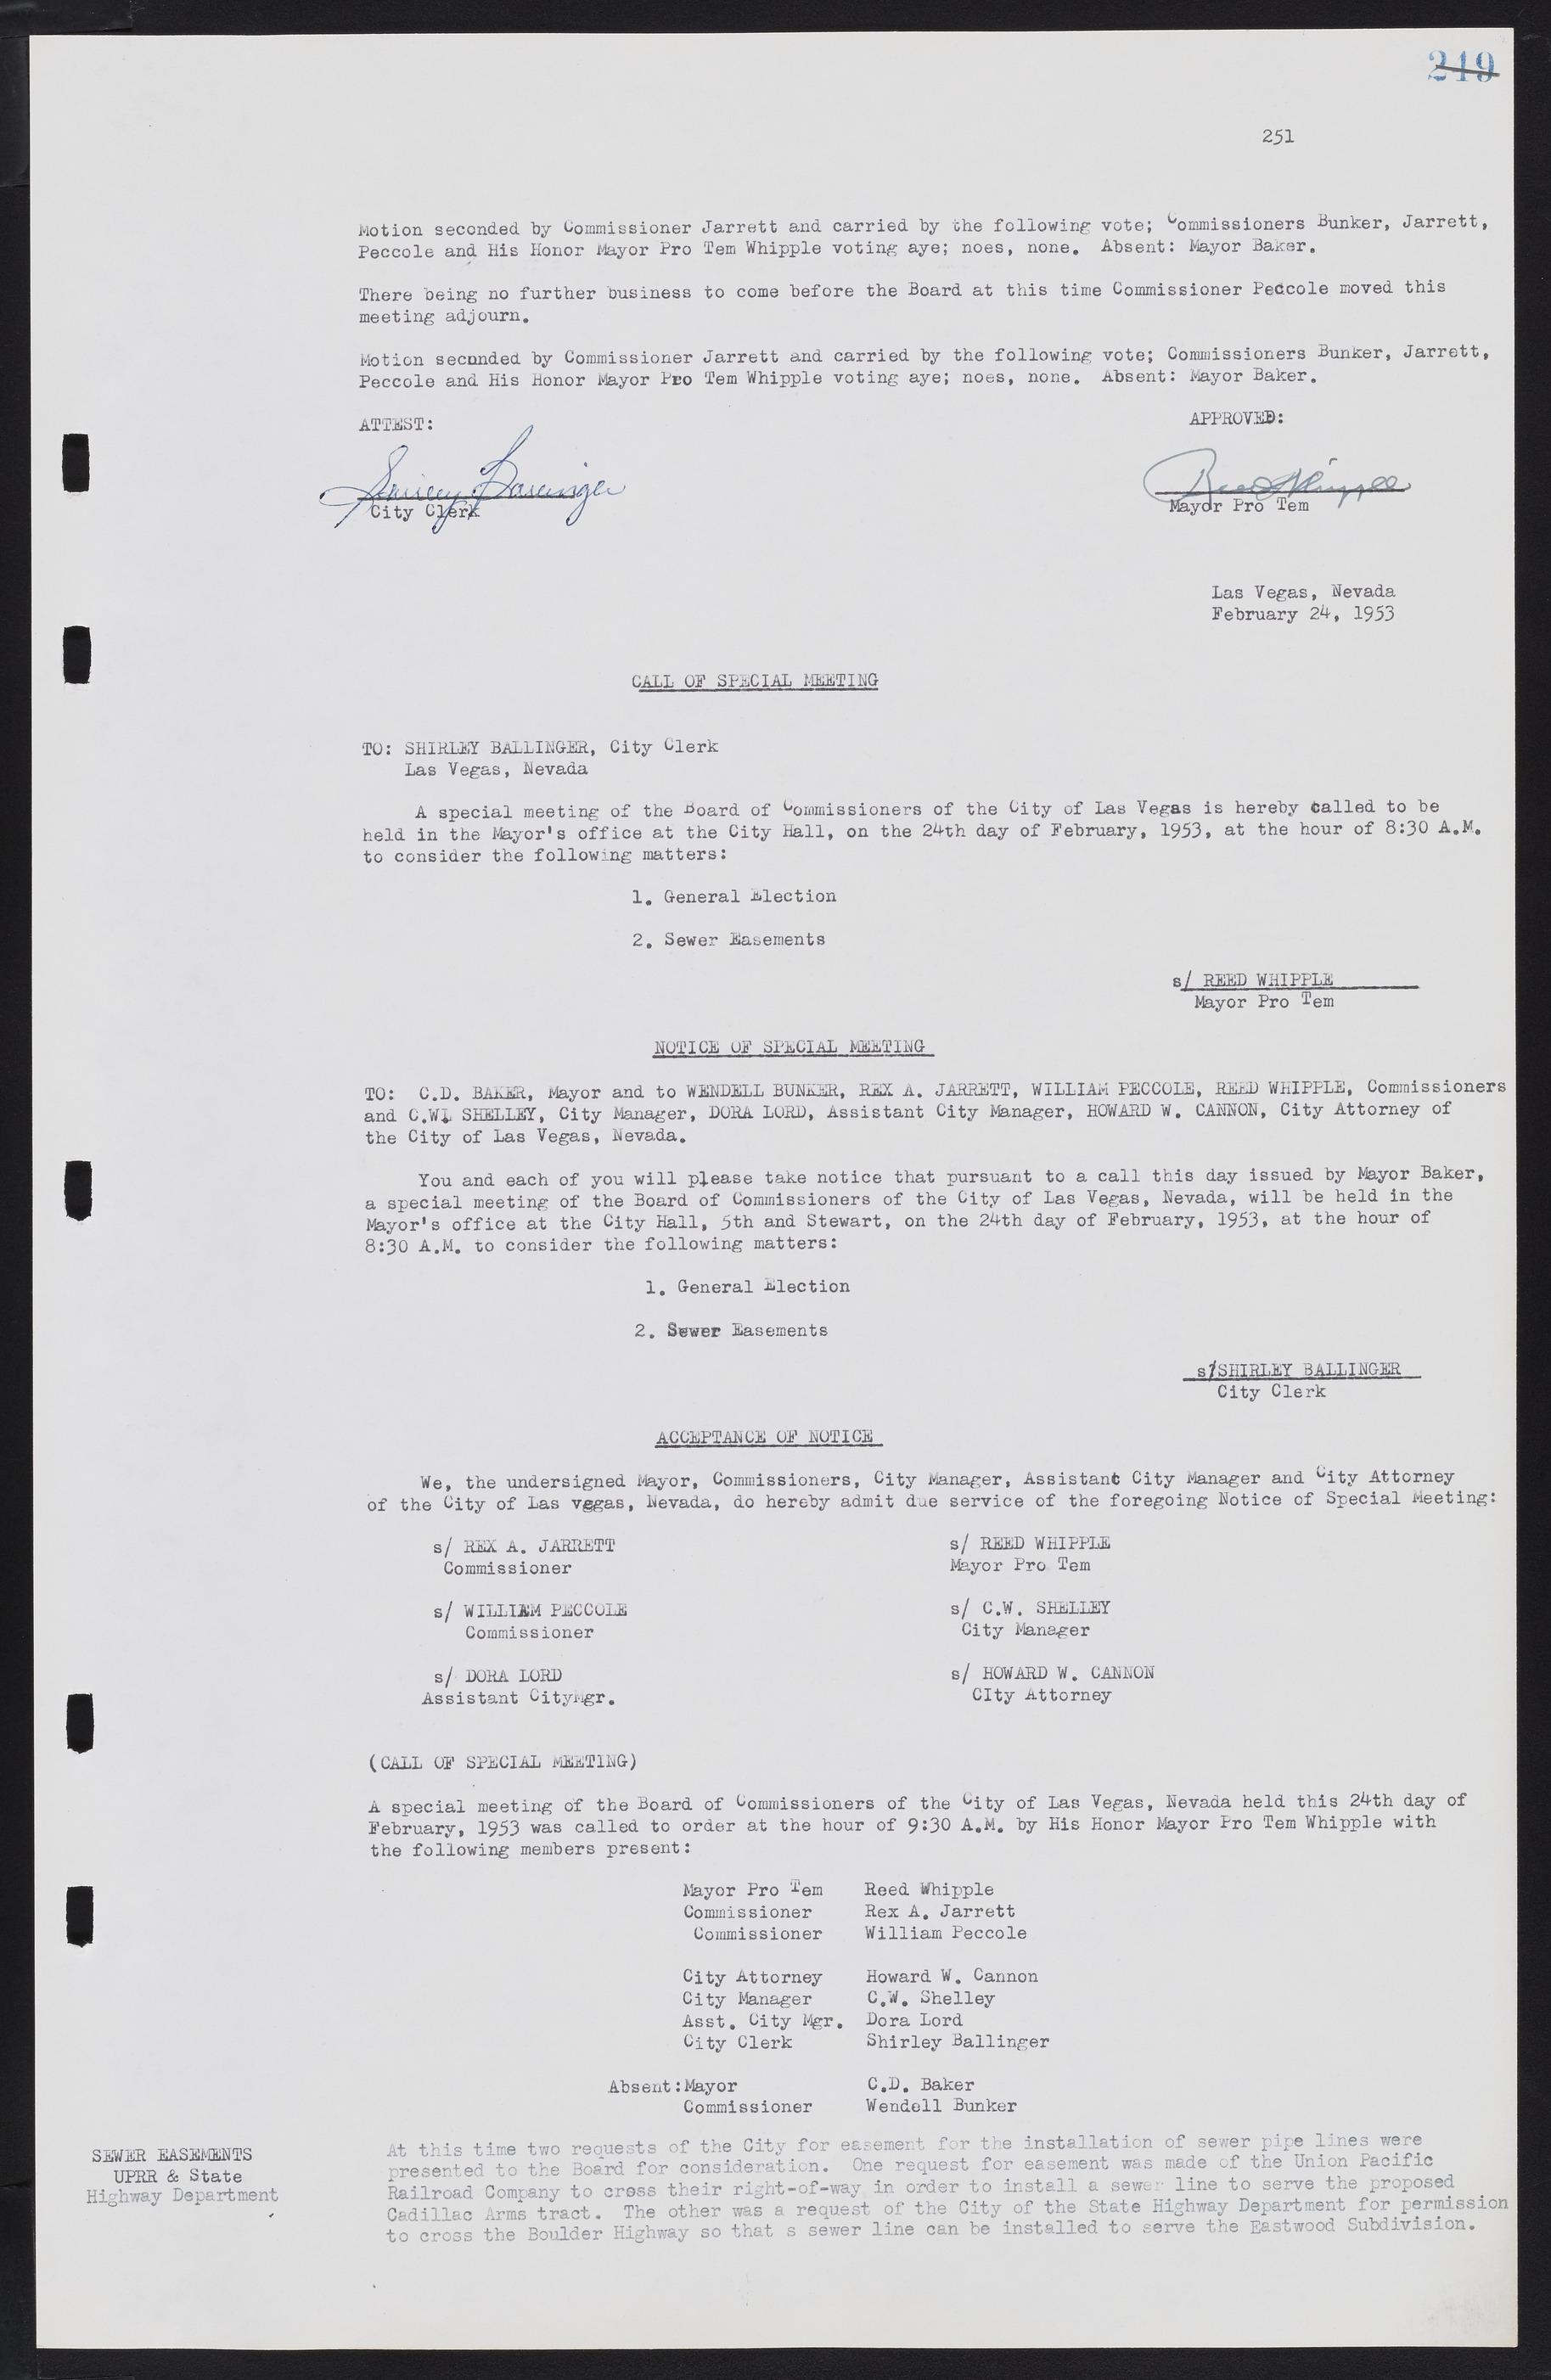 Las Vegas City Commission Minutes, May 26, 1952 to February 17, 1954, lvc000008-267